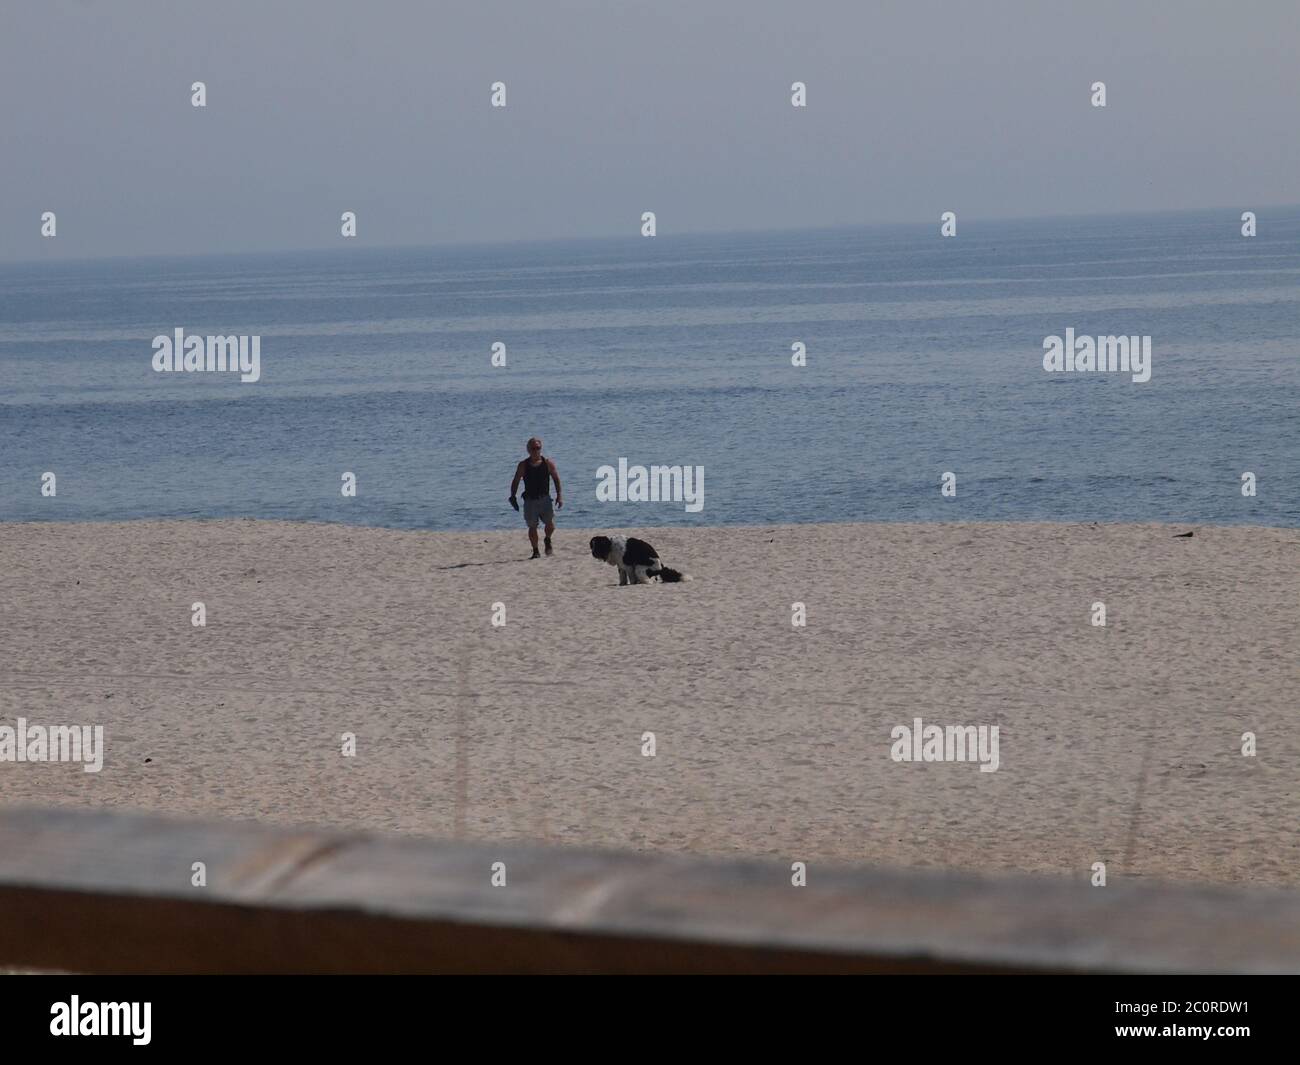 Dog littering beach as owner picks up droppings. Evnironmentally considerate. Stock Photo